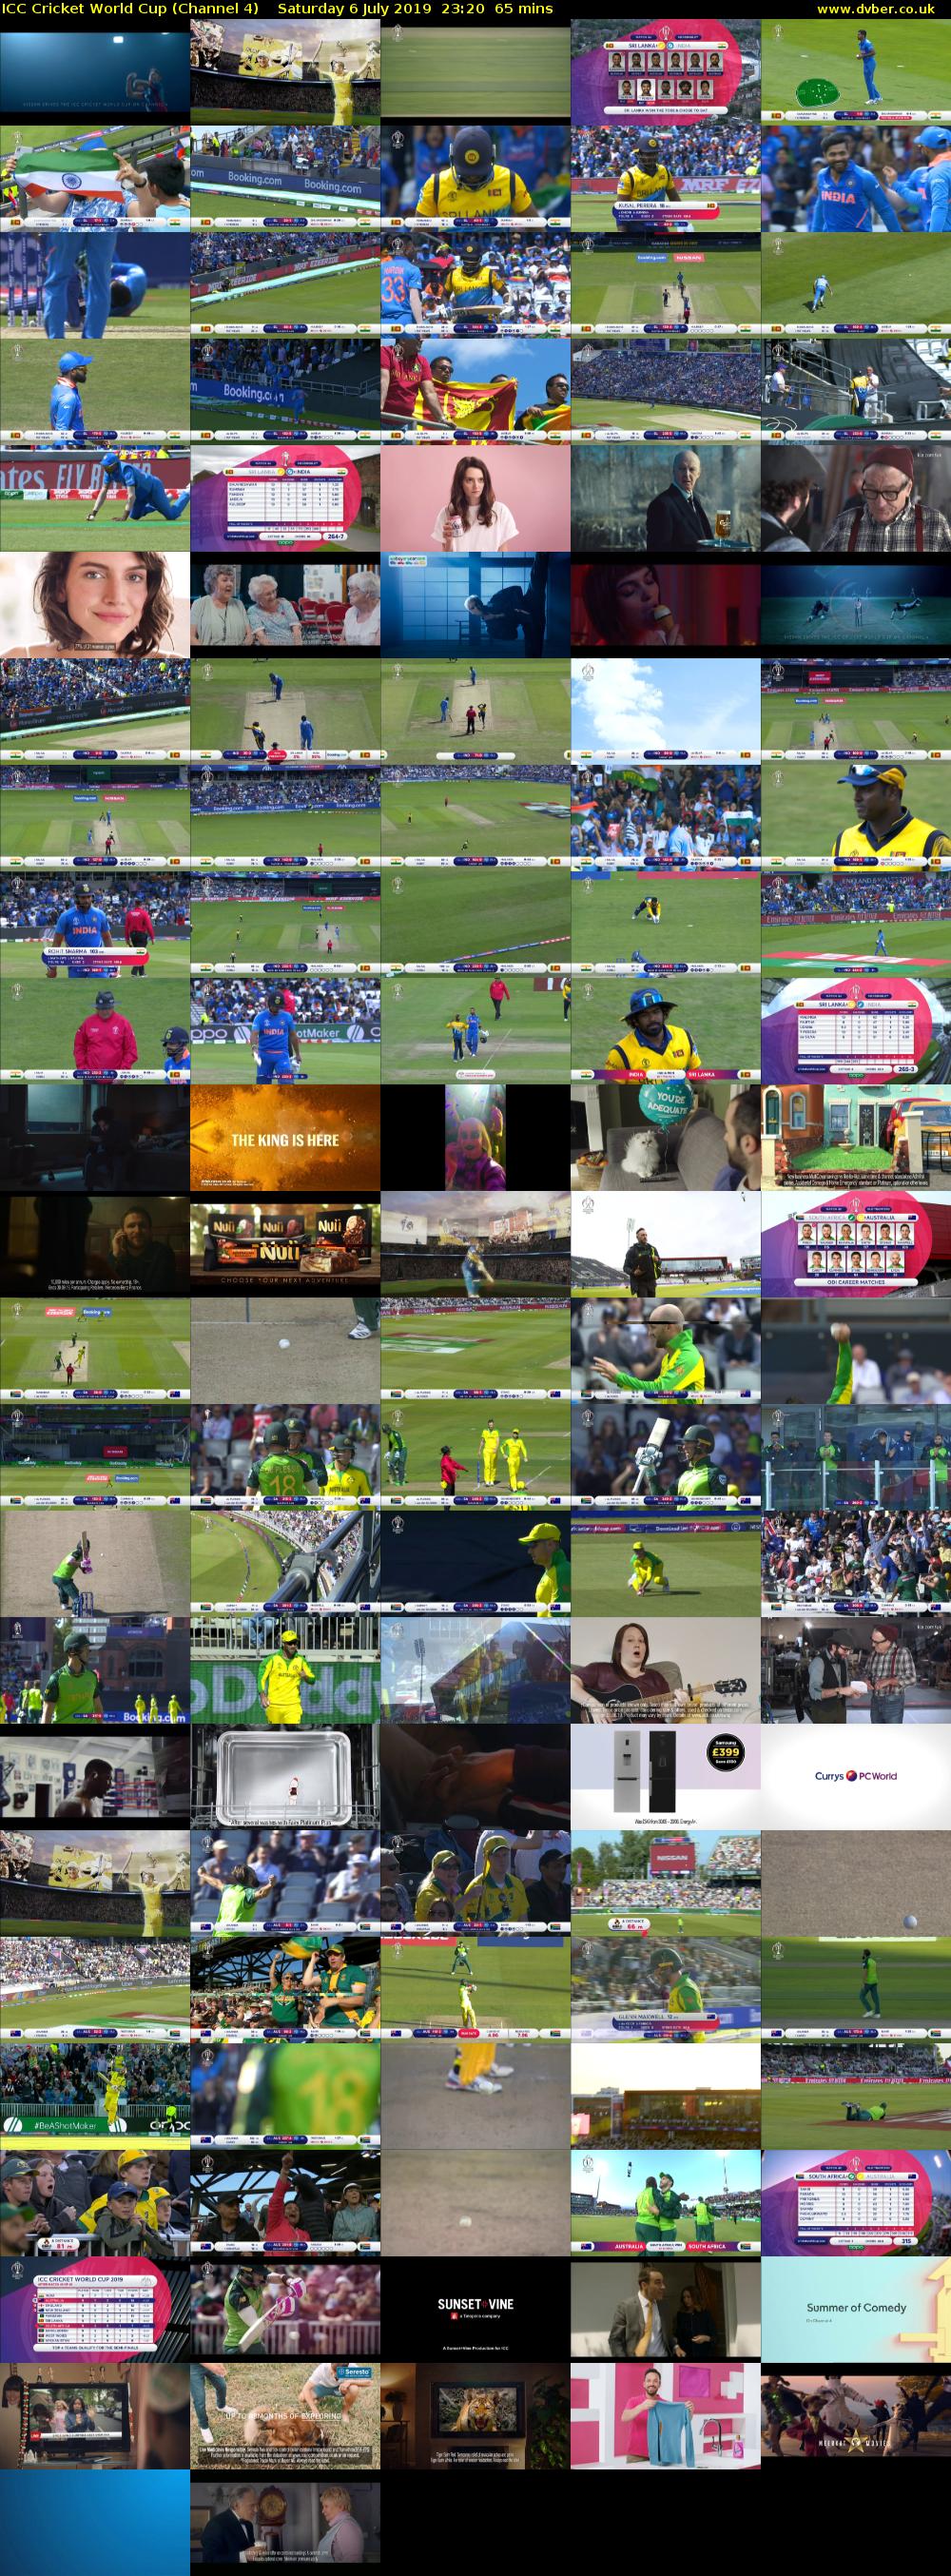 ICC Cricket World Cup (Channel 4) Saturday 6 July 2019 23:20 - 00:25